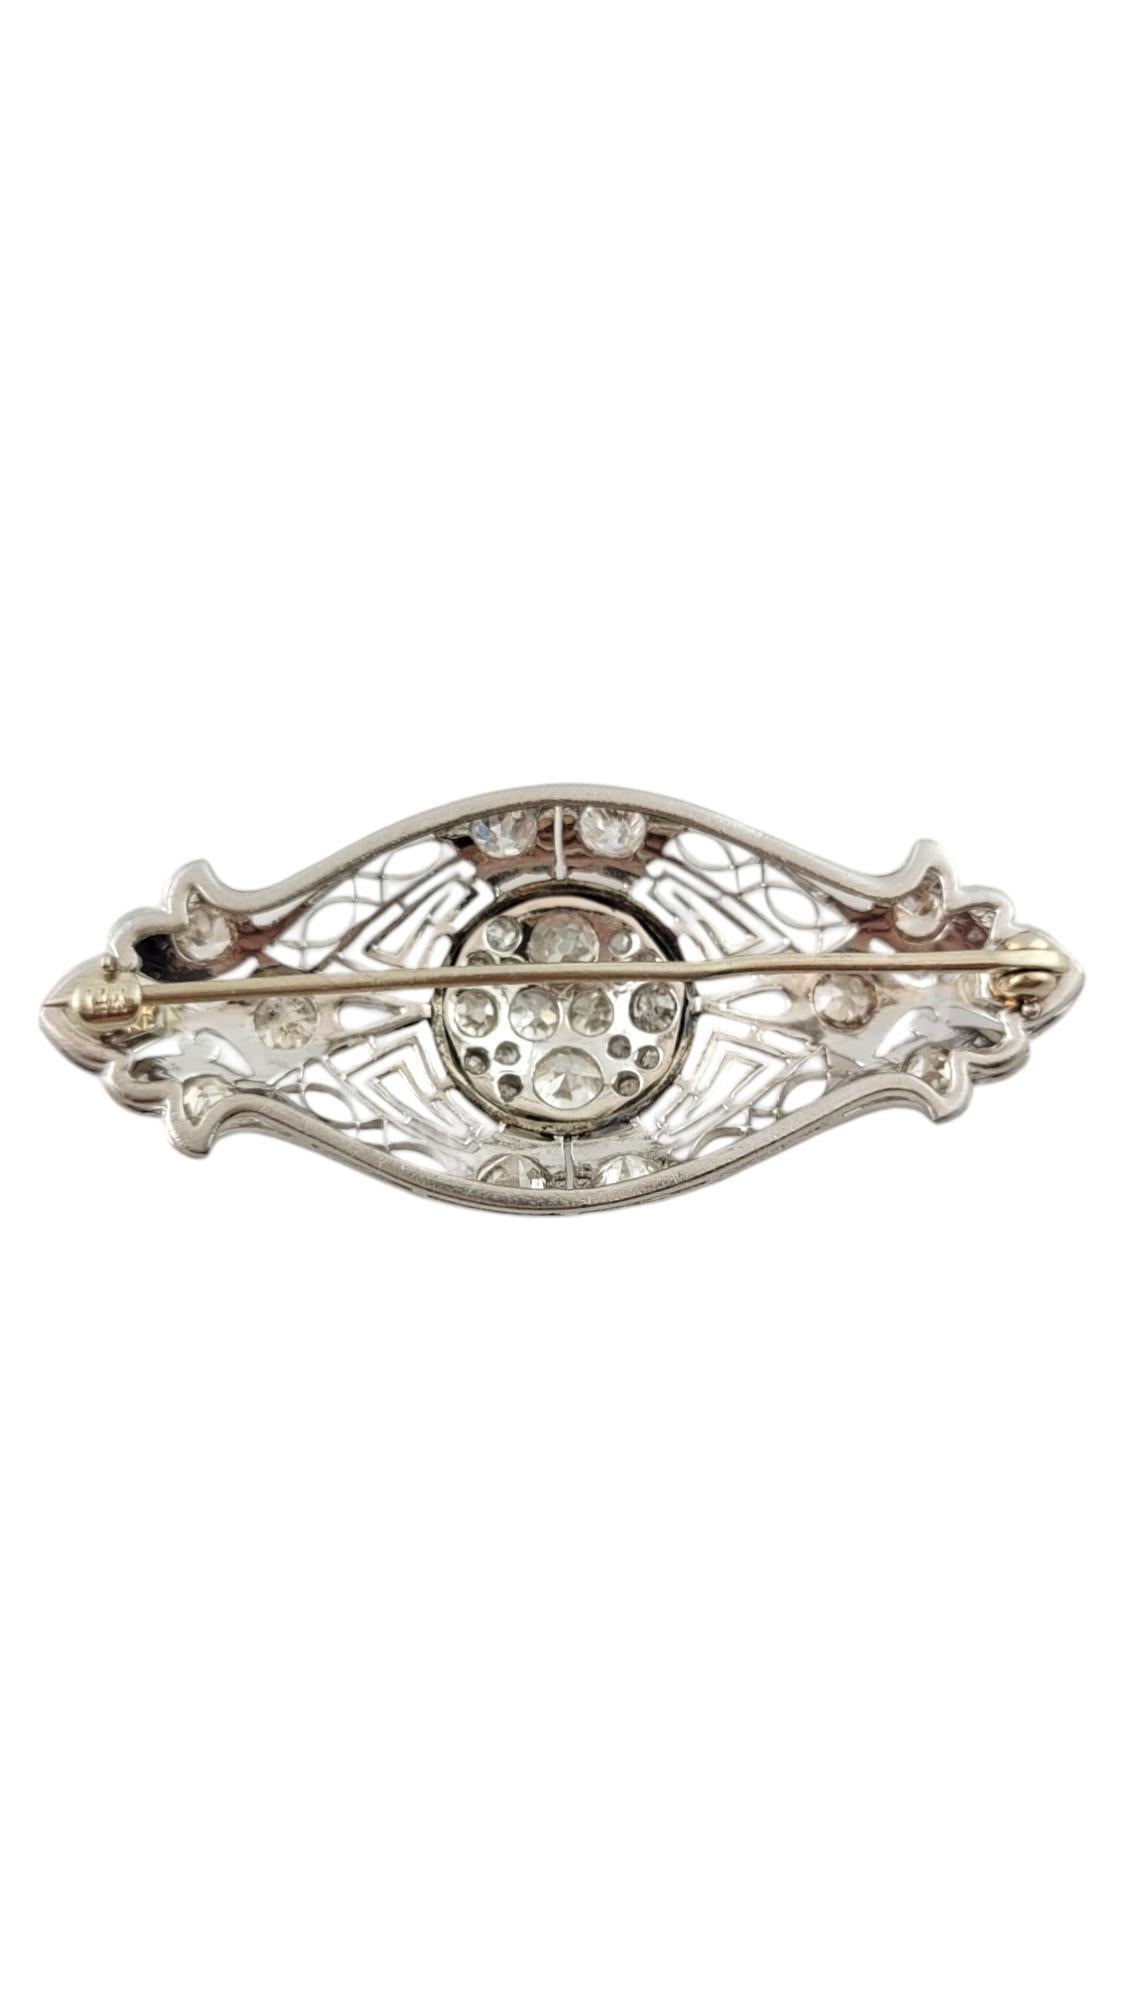 Antique Edwardian Era Platinum and 14K White Gold Diamond Brooch Pin #16451 In Good Condition For Sale In Washington Depot, CT